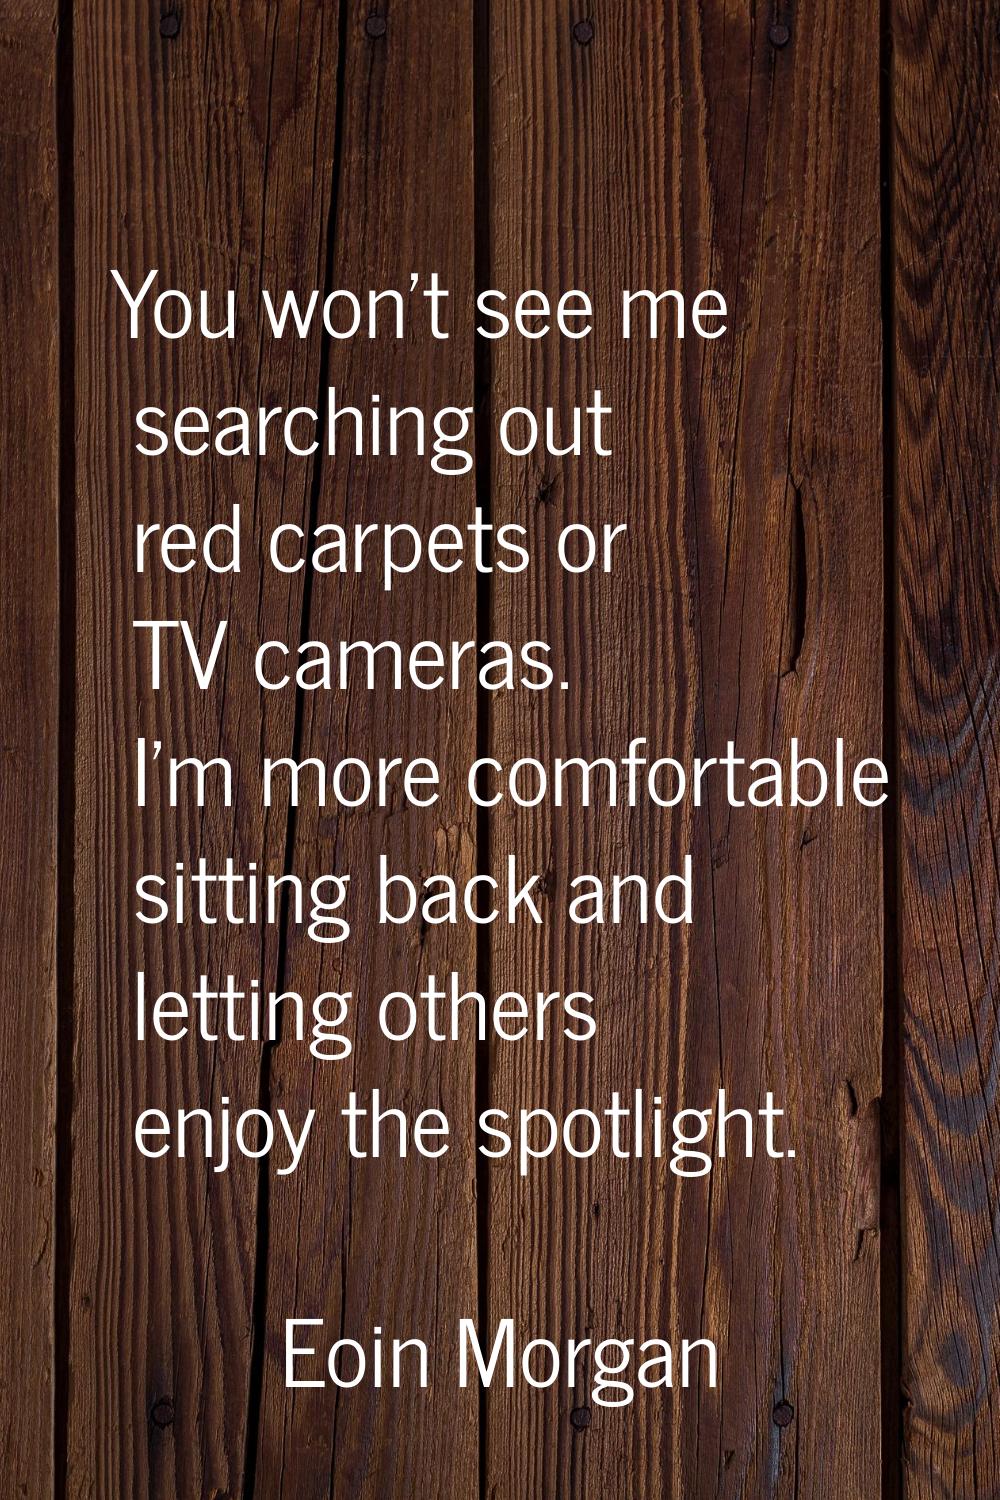 You won't see me searching out red carpets or TV cameras. I'm more comfortable sitting back and let